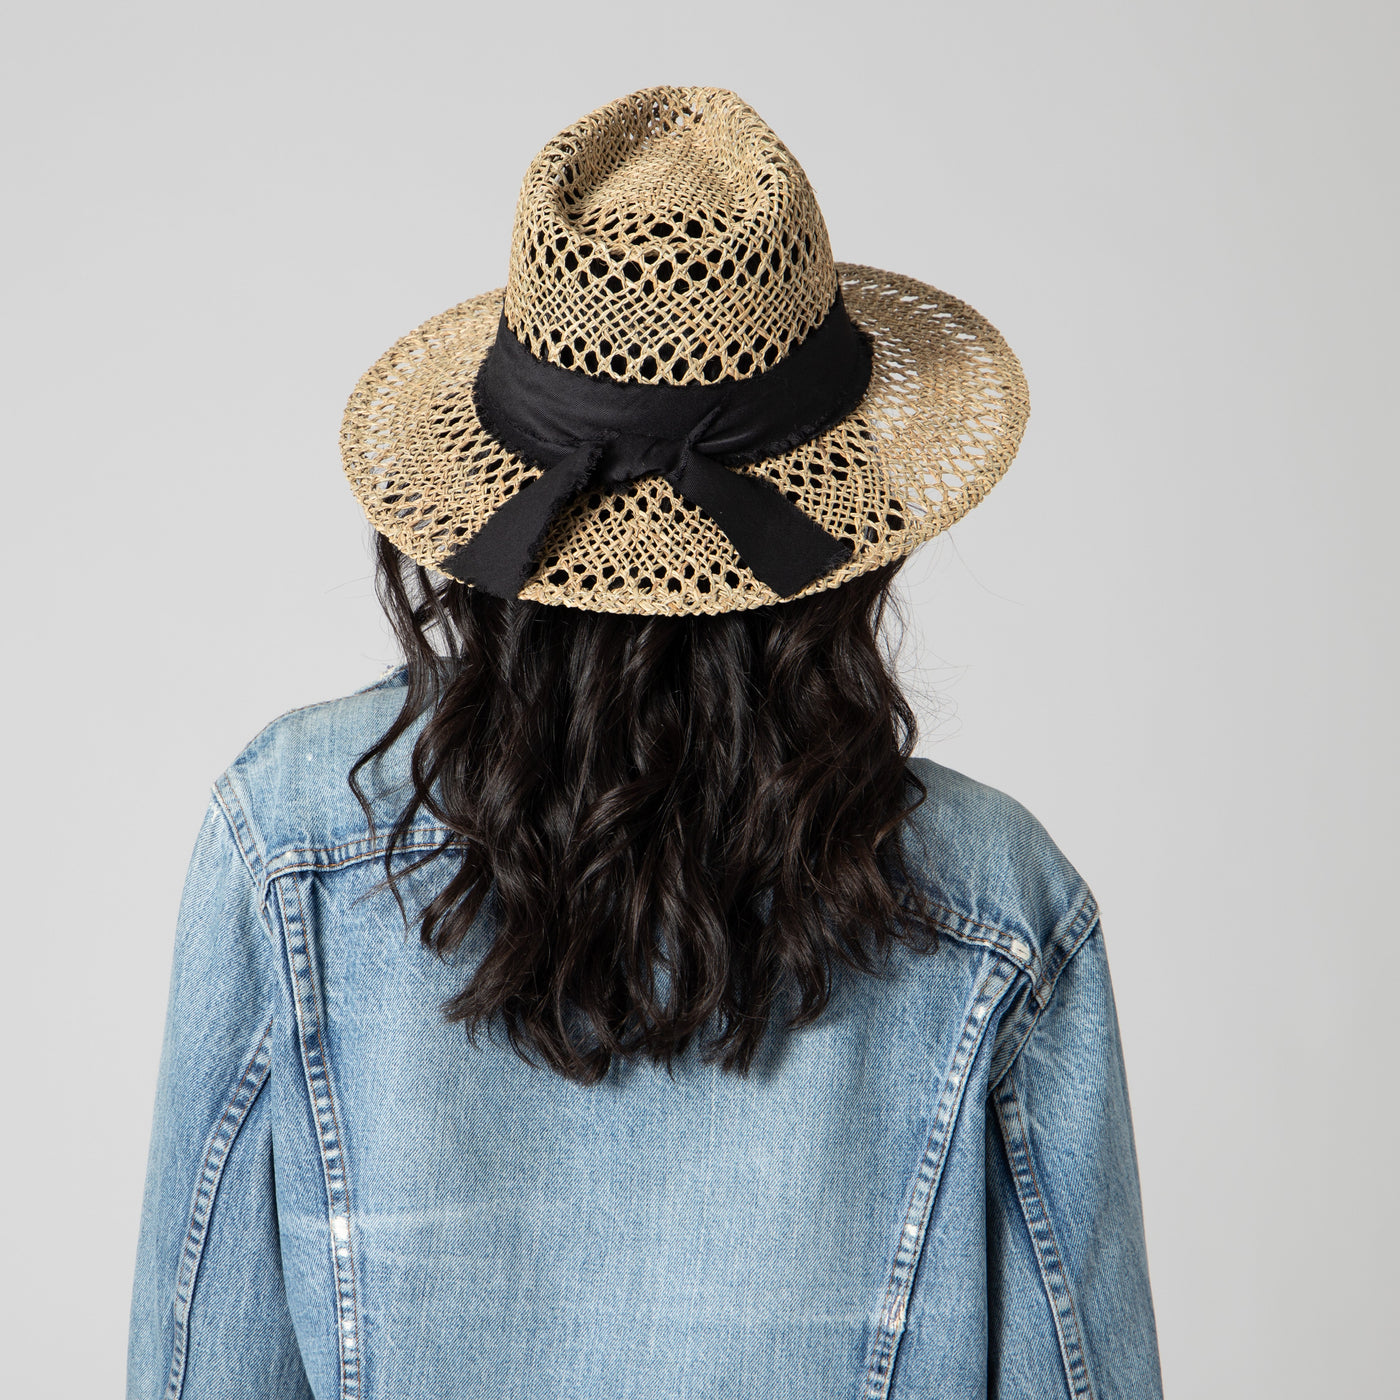 FEDORA - By The Sea Open Weave Fedora